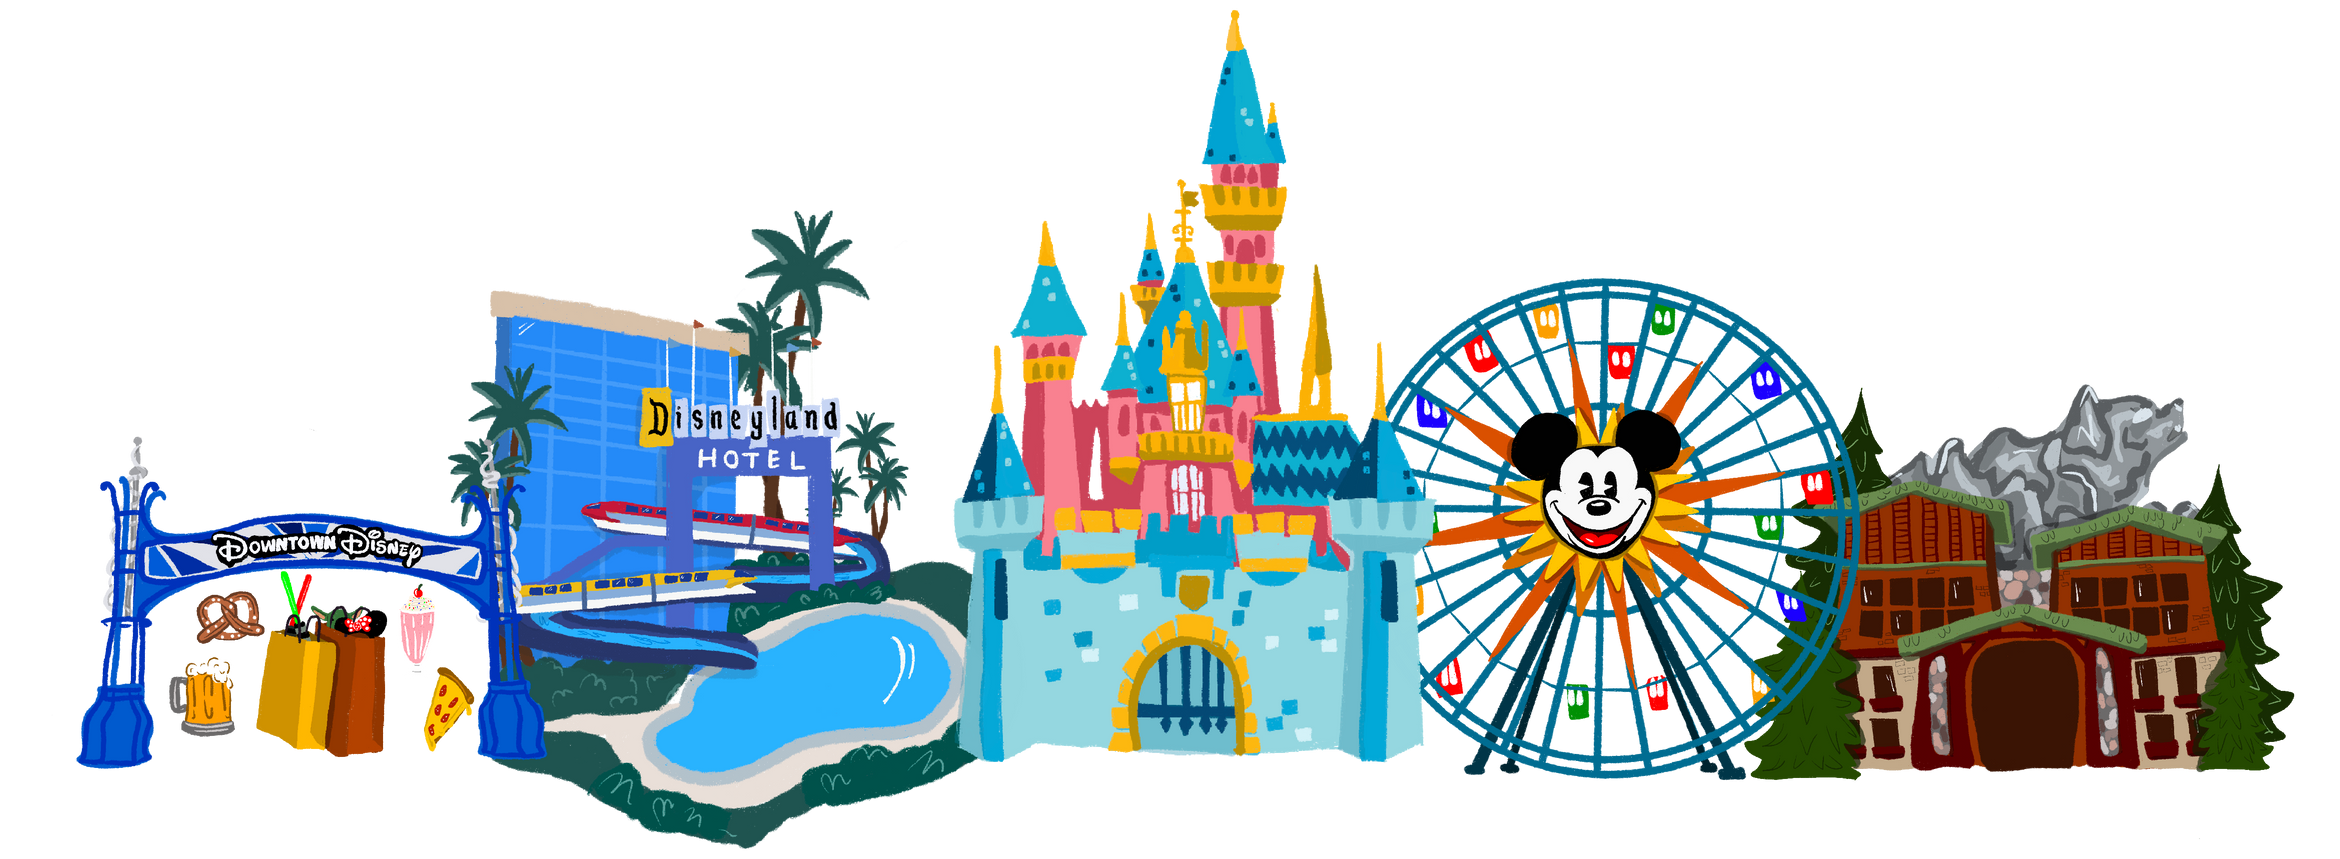 Footer image of Disneyland parks and hotel